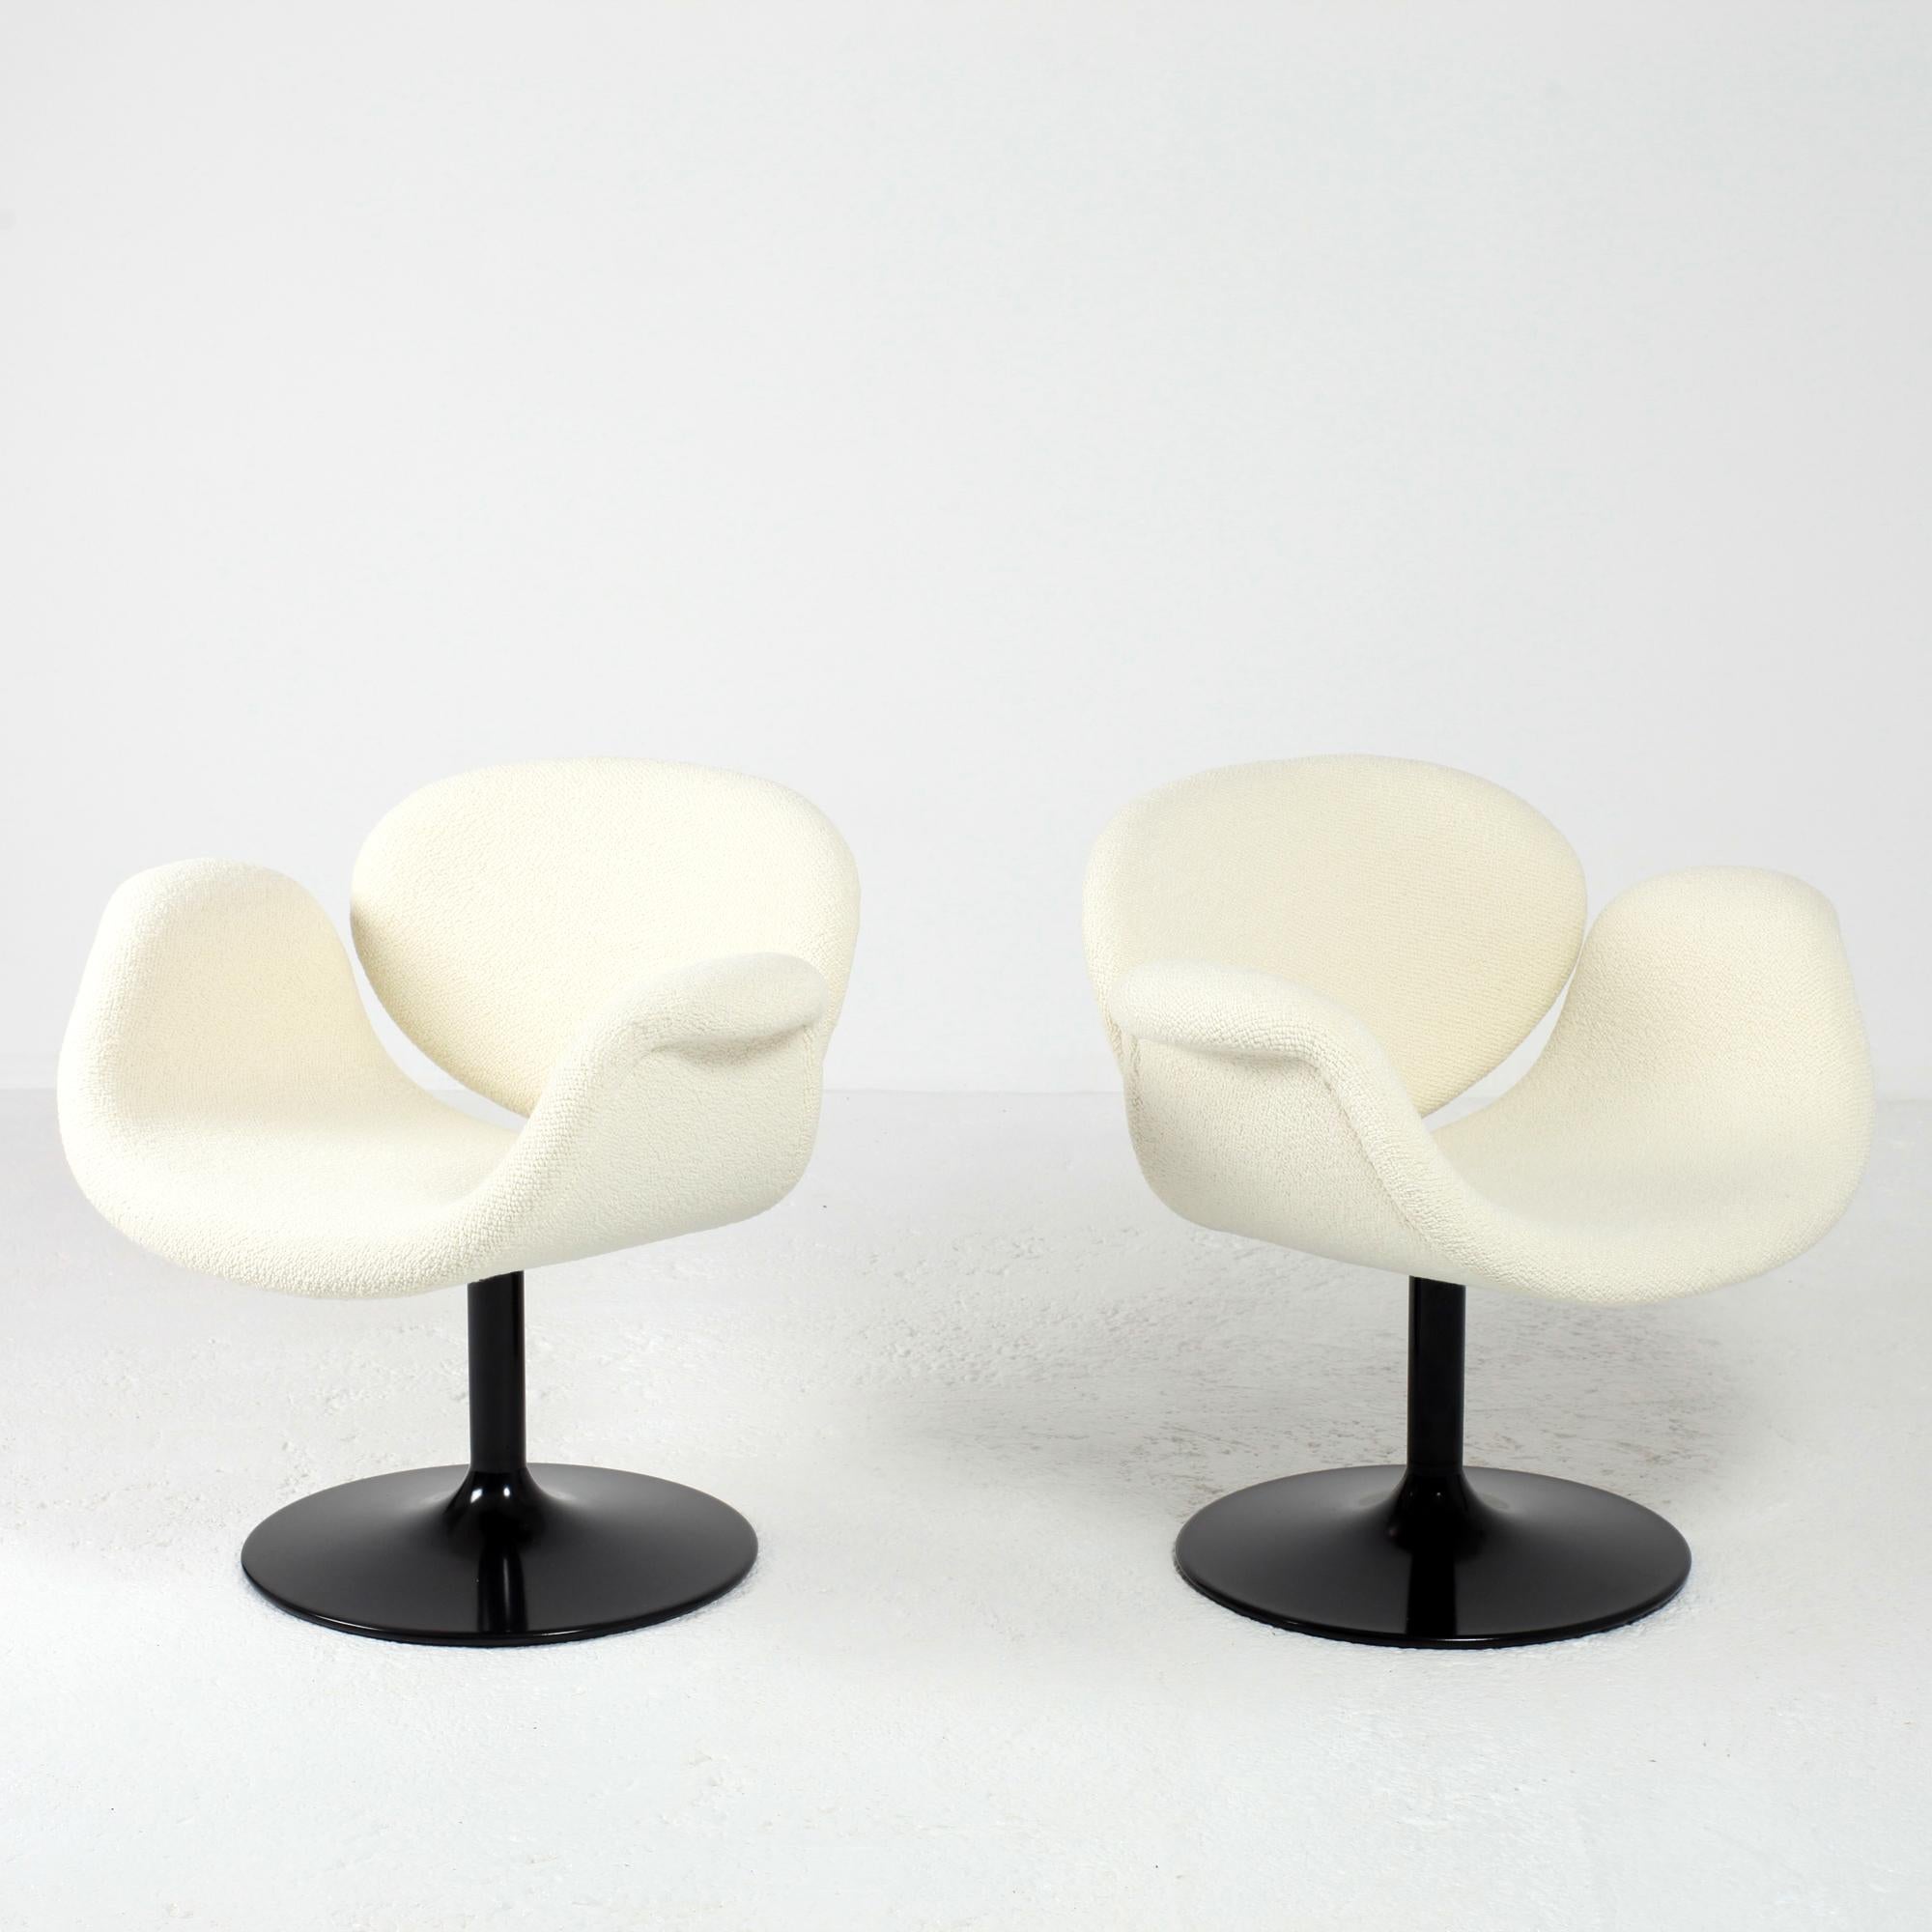 Dutch Pierre Paulin Pair of Little Tulip Swivel Chairs First Edition, 1960s